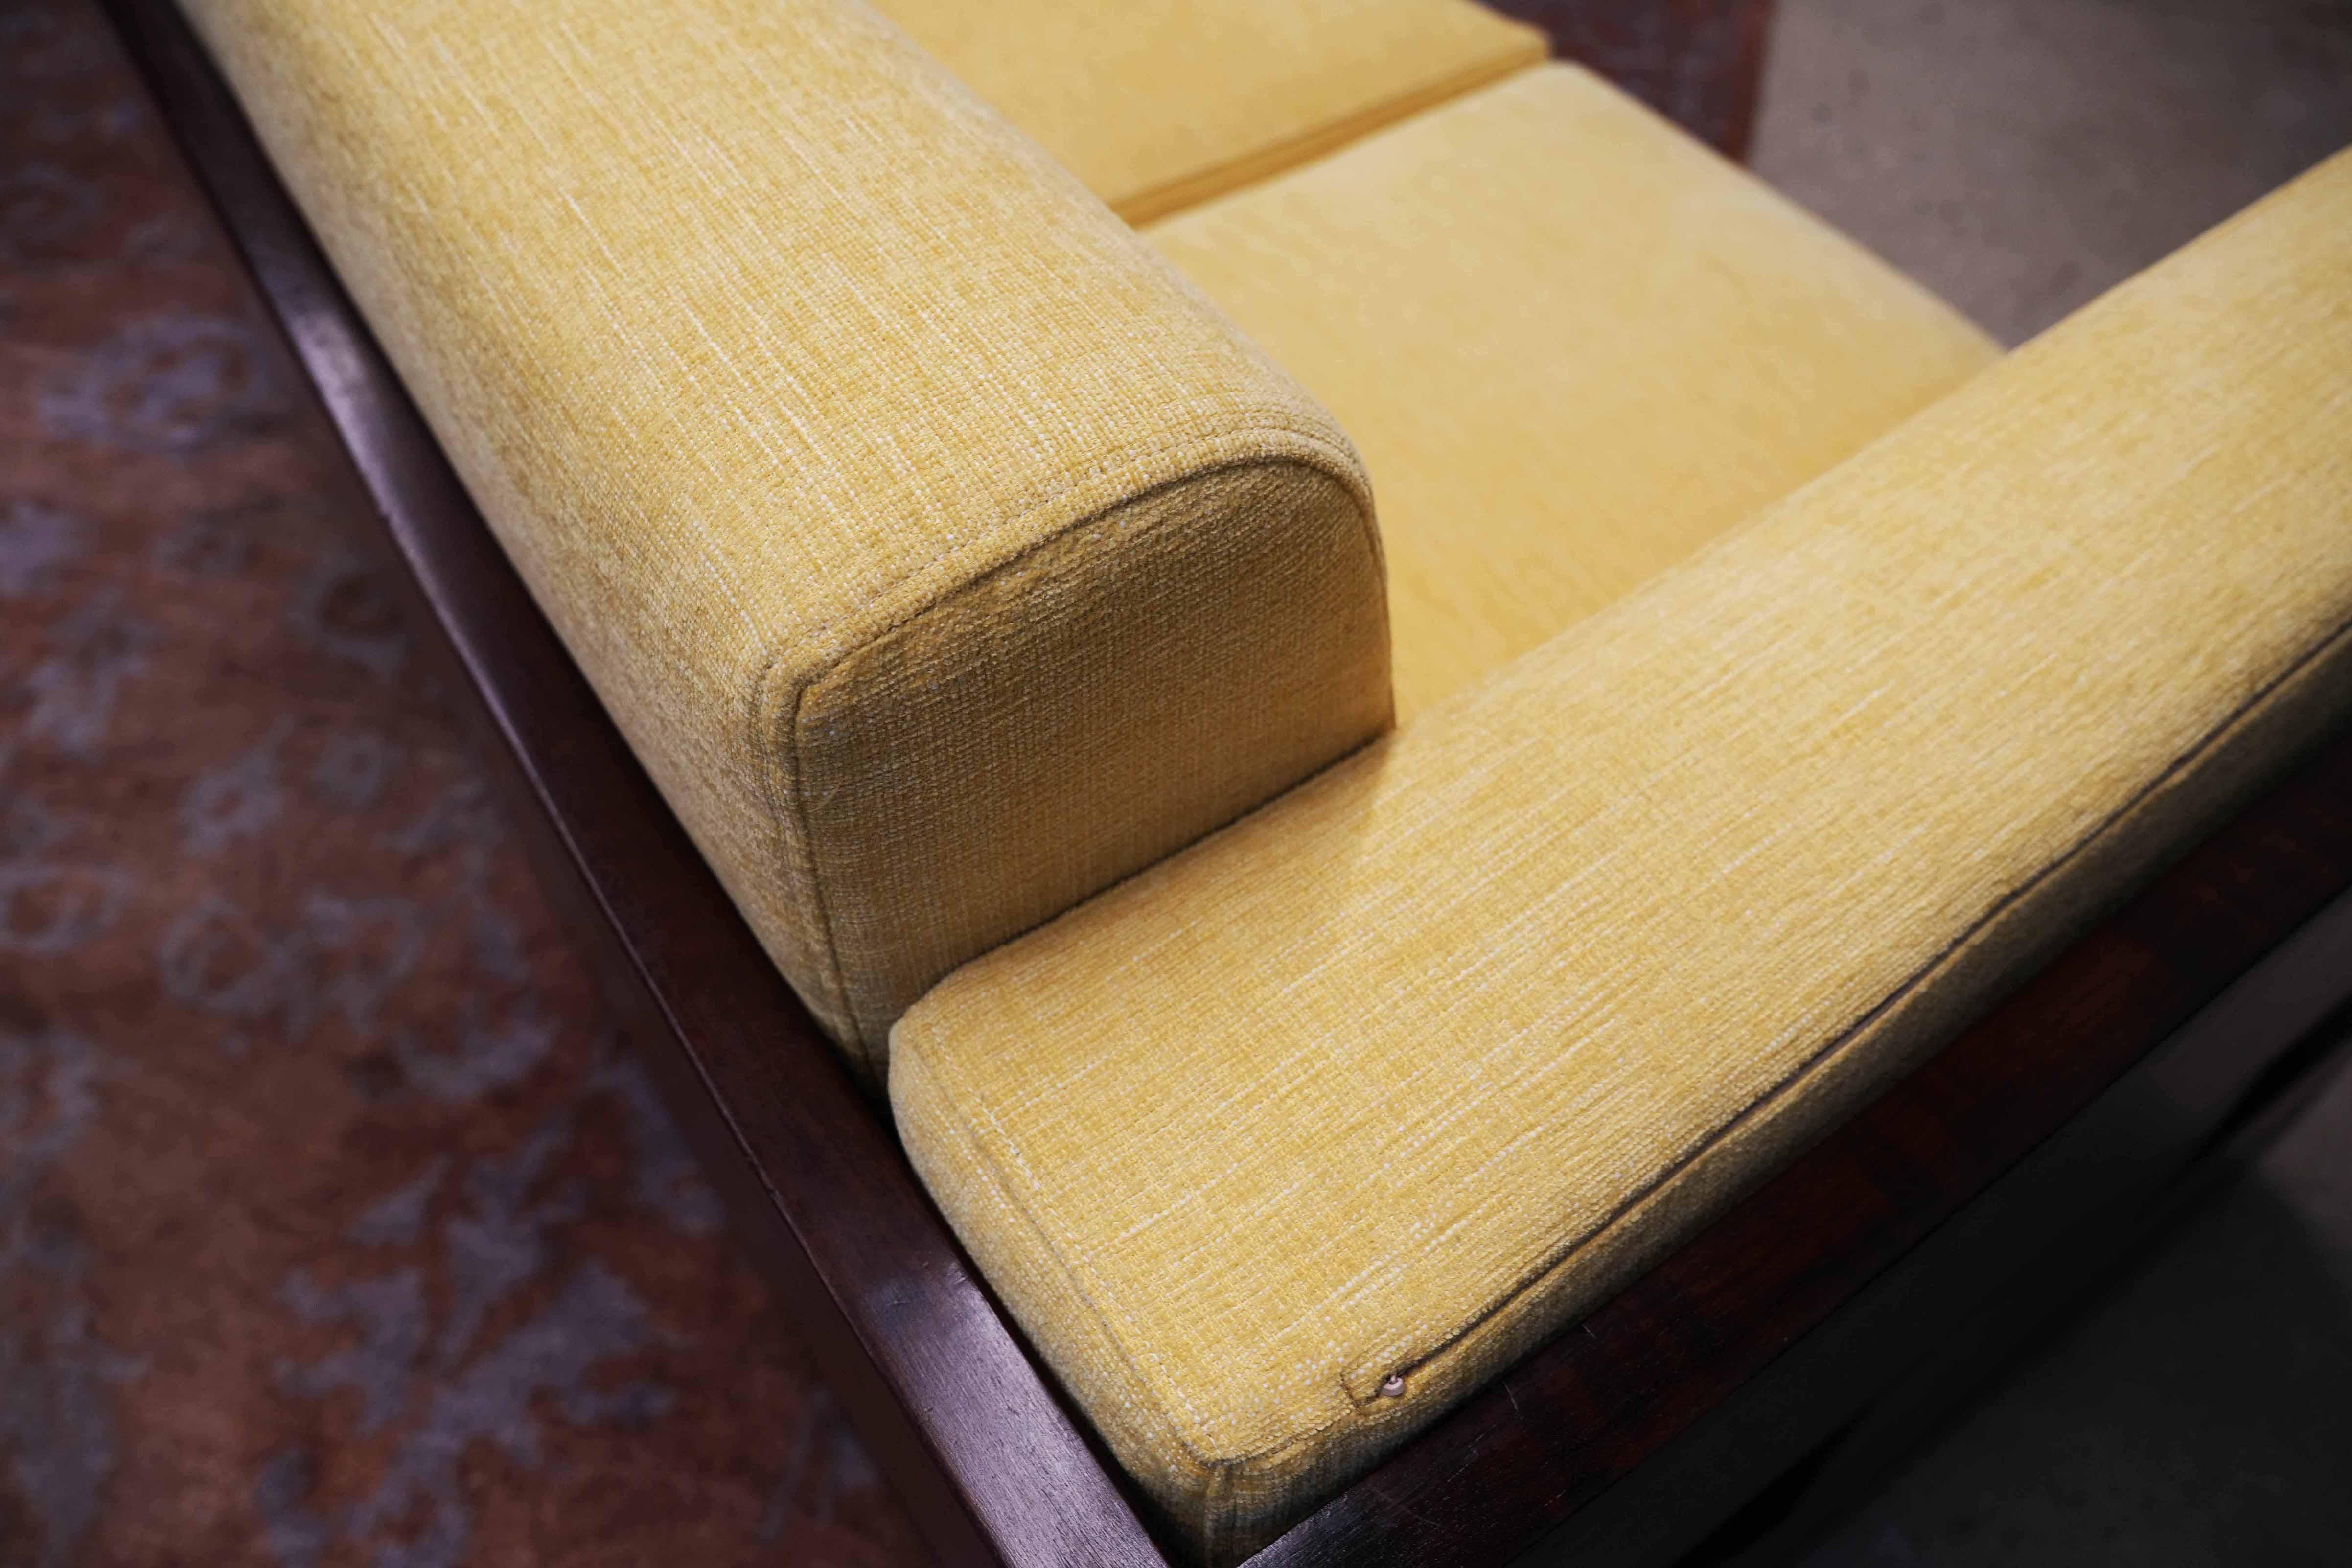 20th Century Brazilian Modern Sofa in Hardwood and Yellow Chenille by Celina, Brazil, c. 1960 For Sale